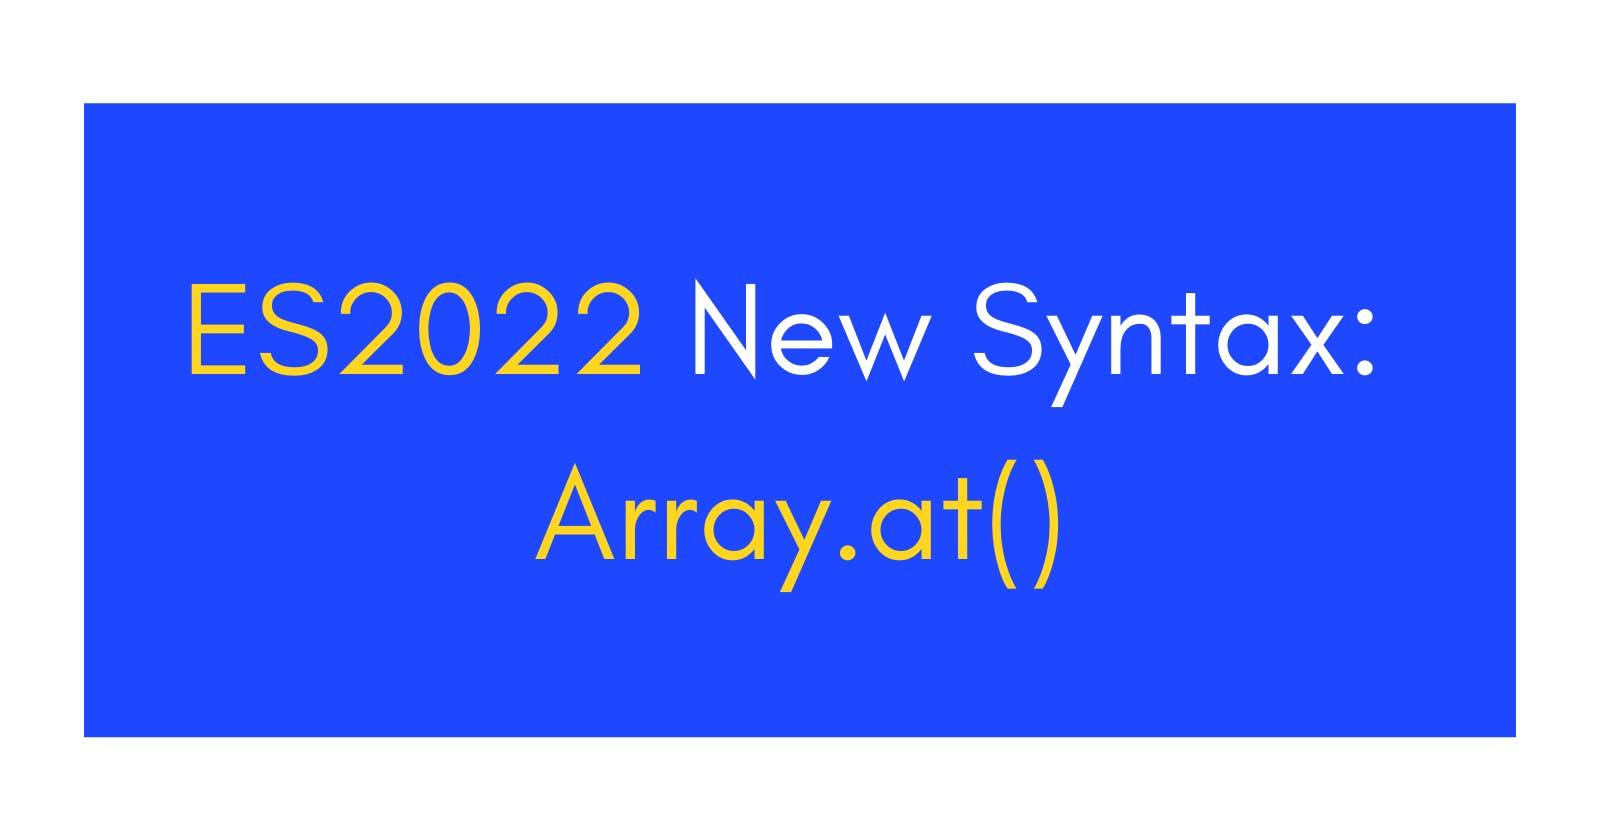 ES2022 New Syntax: Array.at()